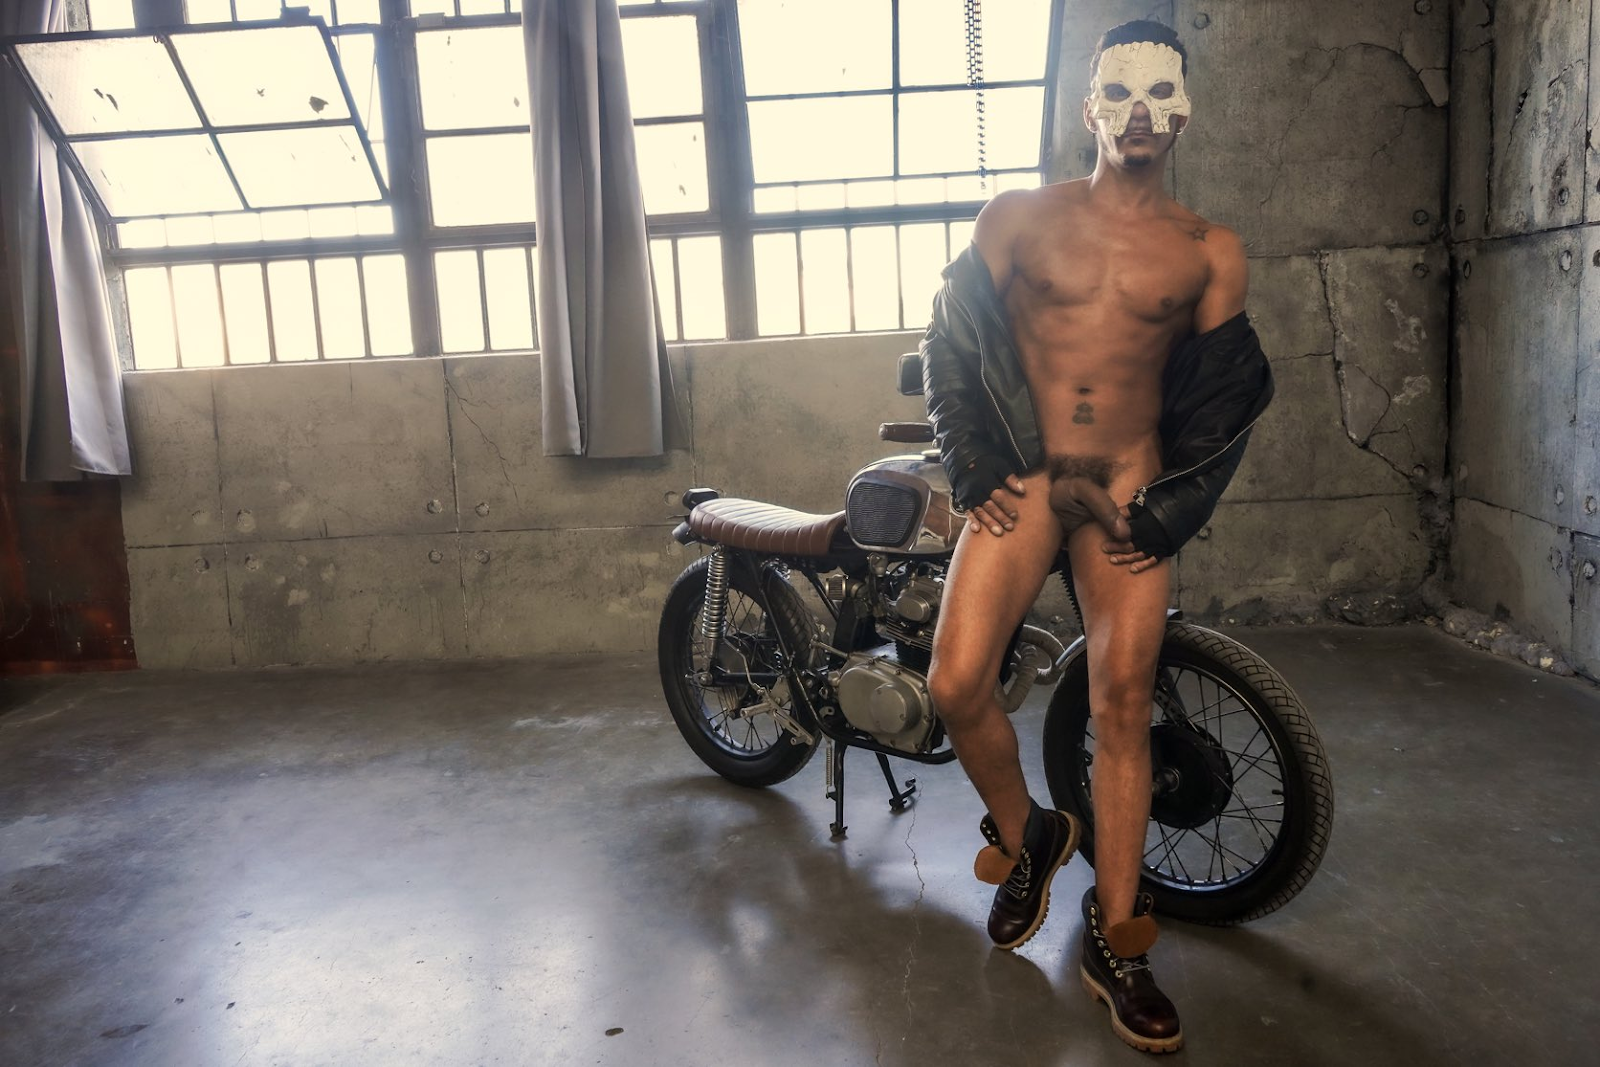 Cesar Xes wearing a leather jacket posing near a motorbike wearing no pants and touching his half erect dick